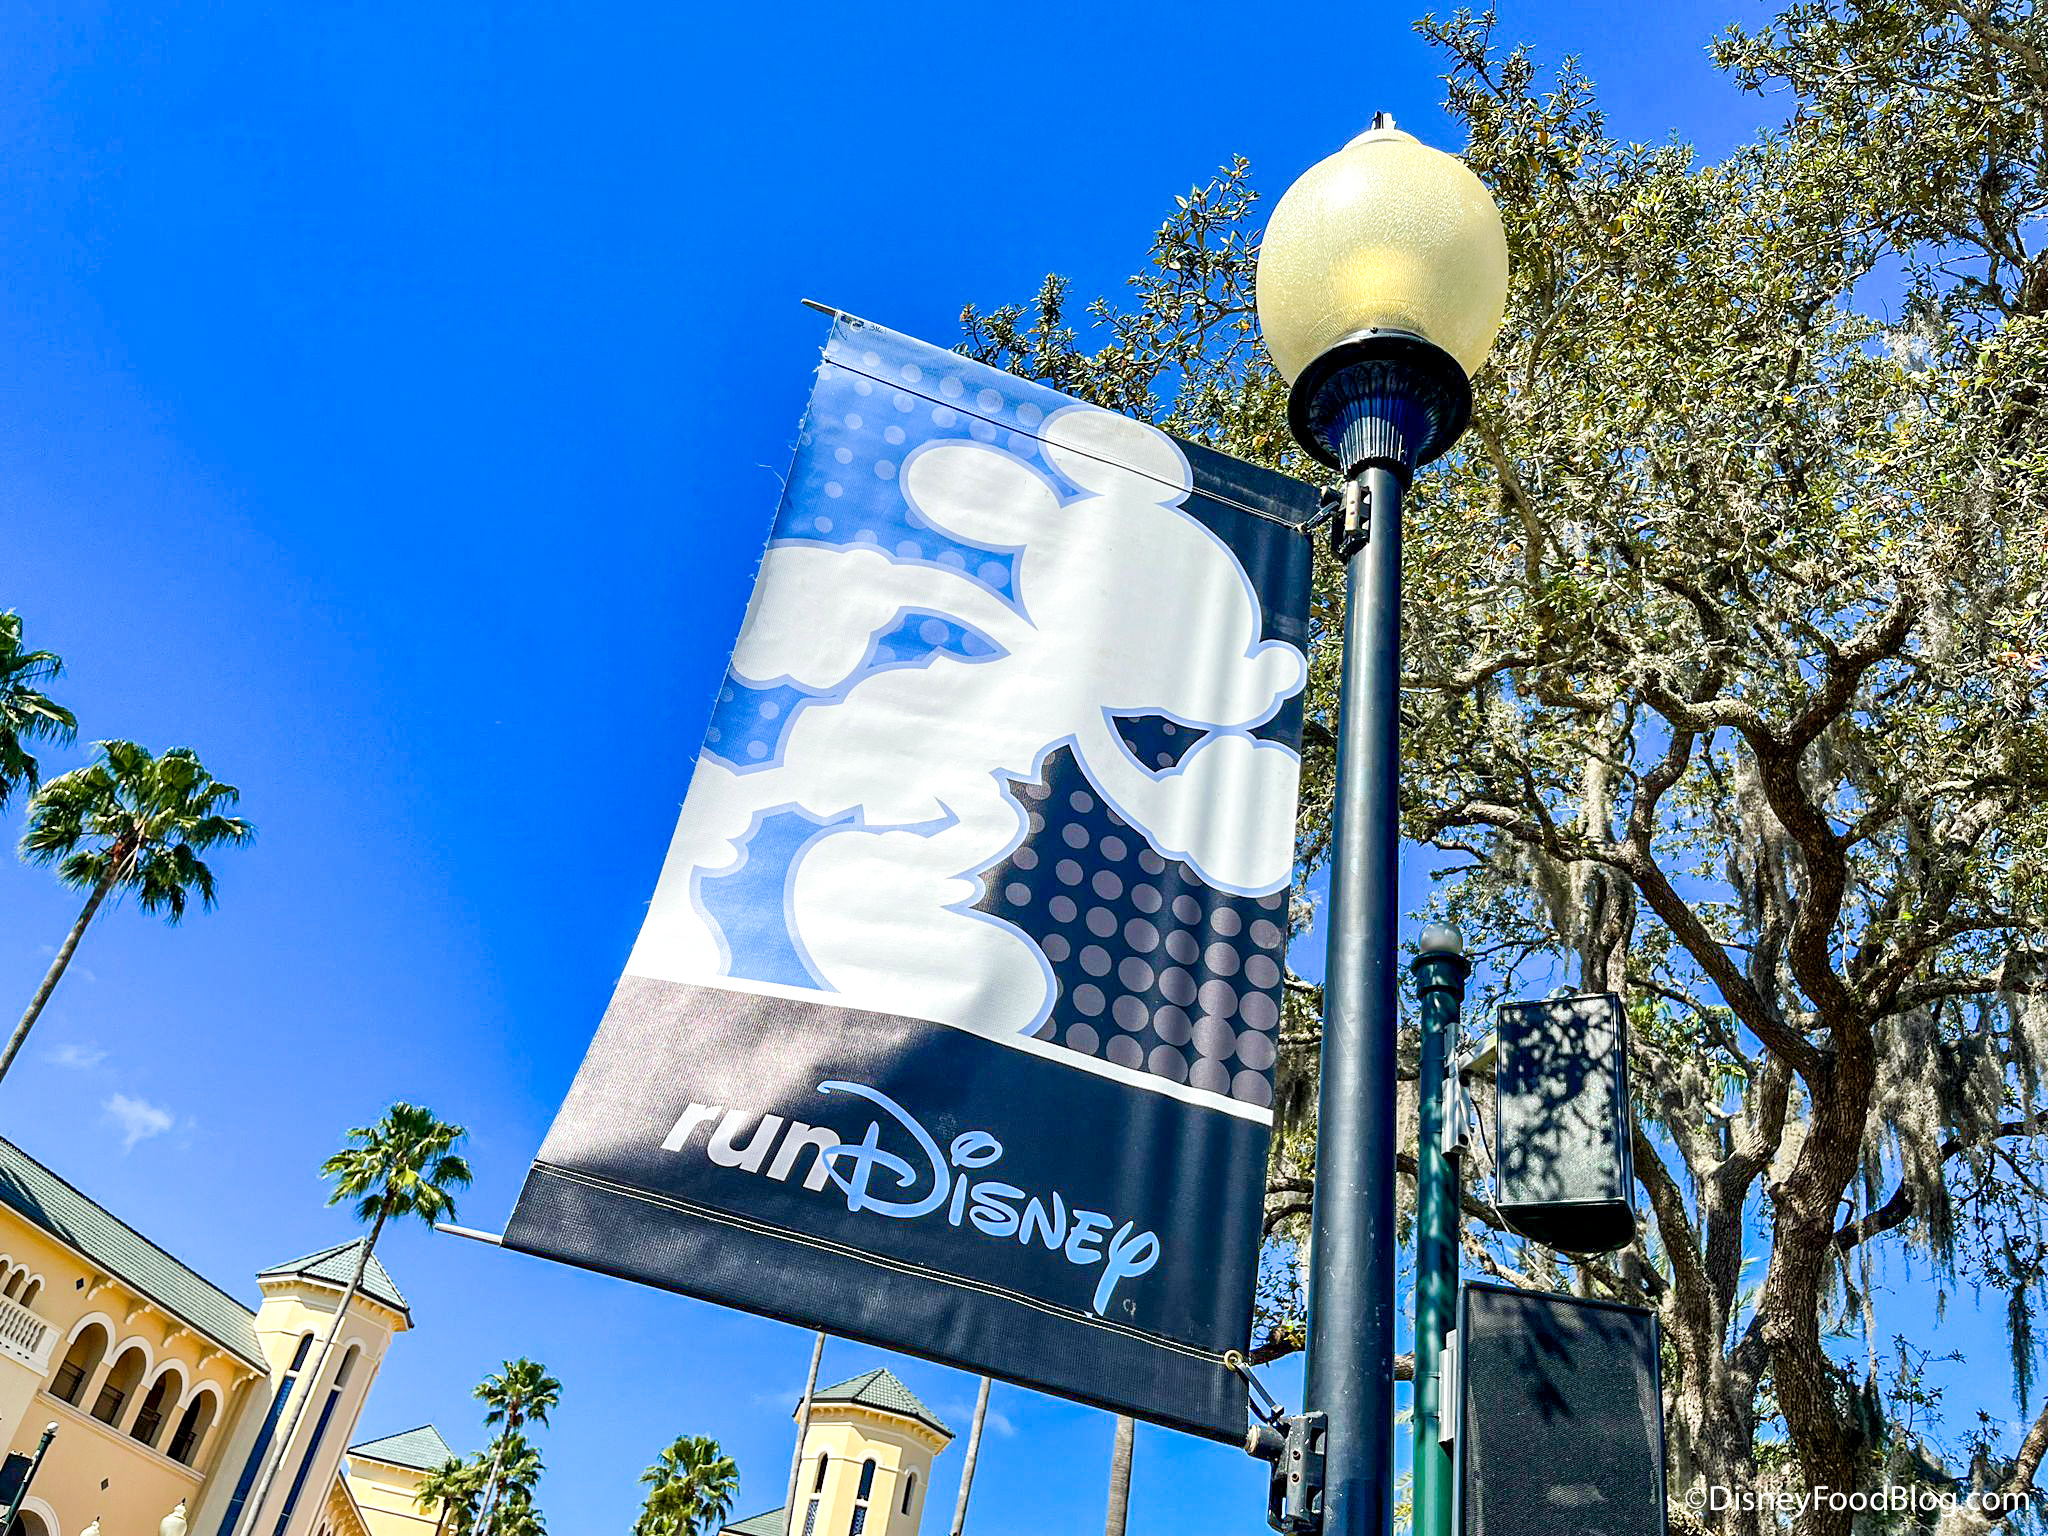 NEWS: Prices, Registration Date, and MORE Revealed for runDisney’s ‘Frozen’-Themed Virtual Races!